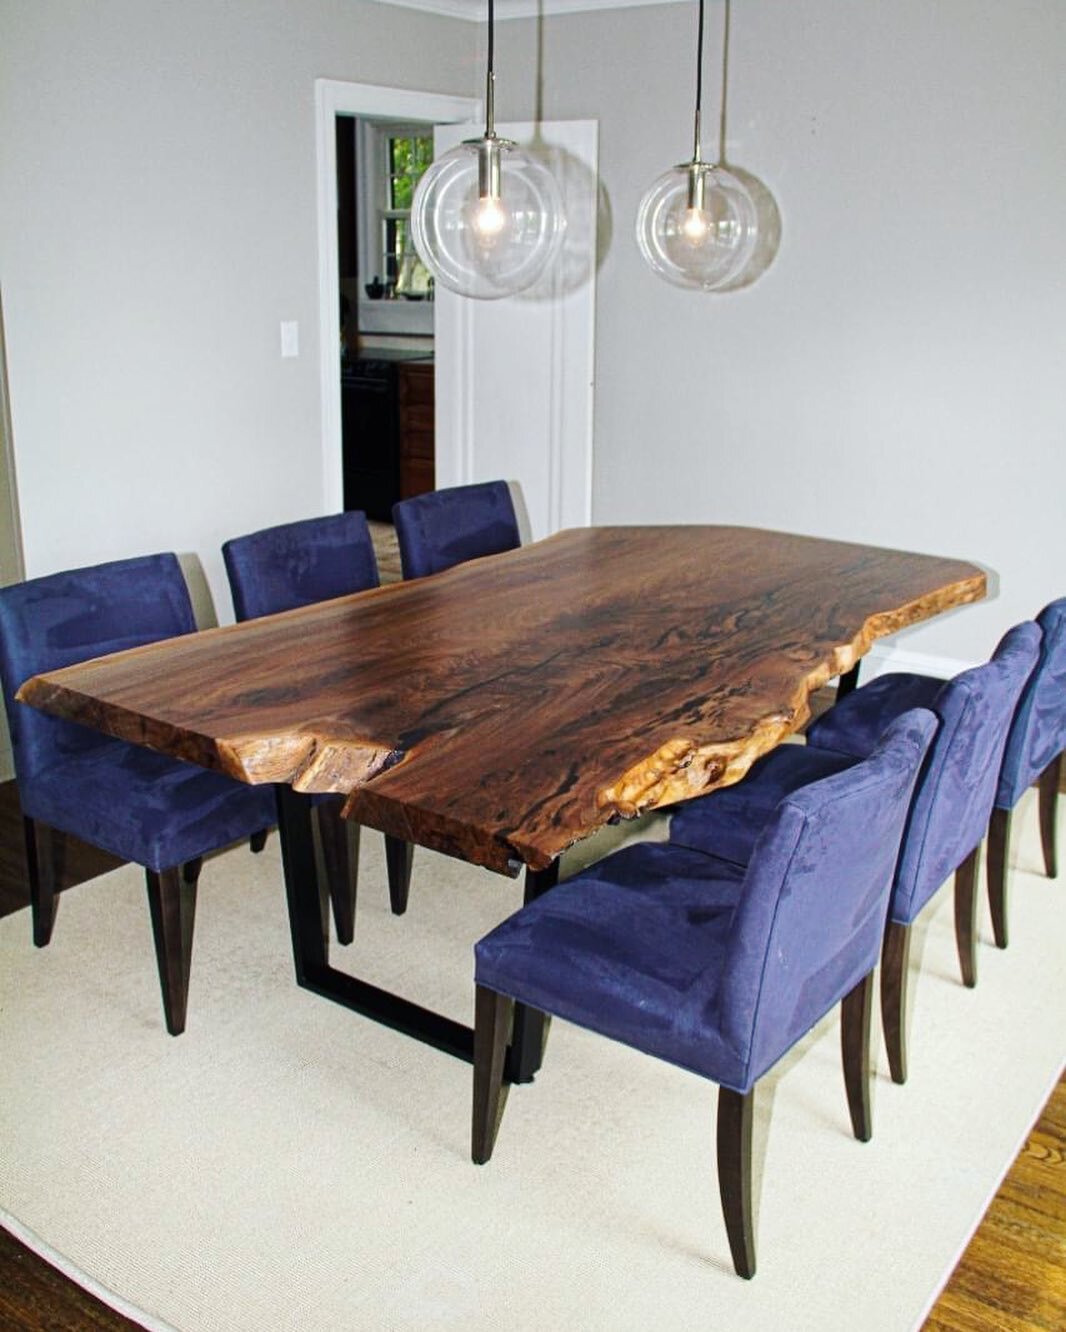 Check out this gorgeous black walnut dinning table! 🤩
Contact me today to design and build your custom table.
☎️ 952-367-7189
🌐 www.fjelstednord.com
*
*
*
#bonitaspringsfl #woodworker #customwoodfurniture #beautiful #woodworking #woodlover #customf